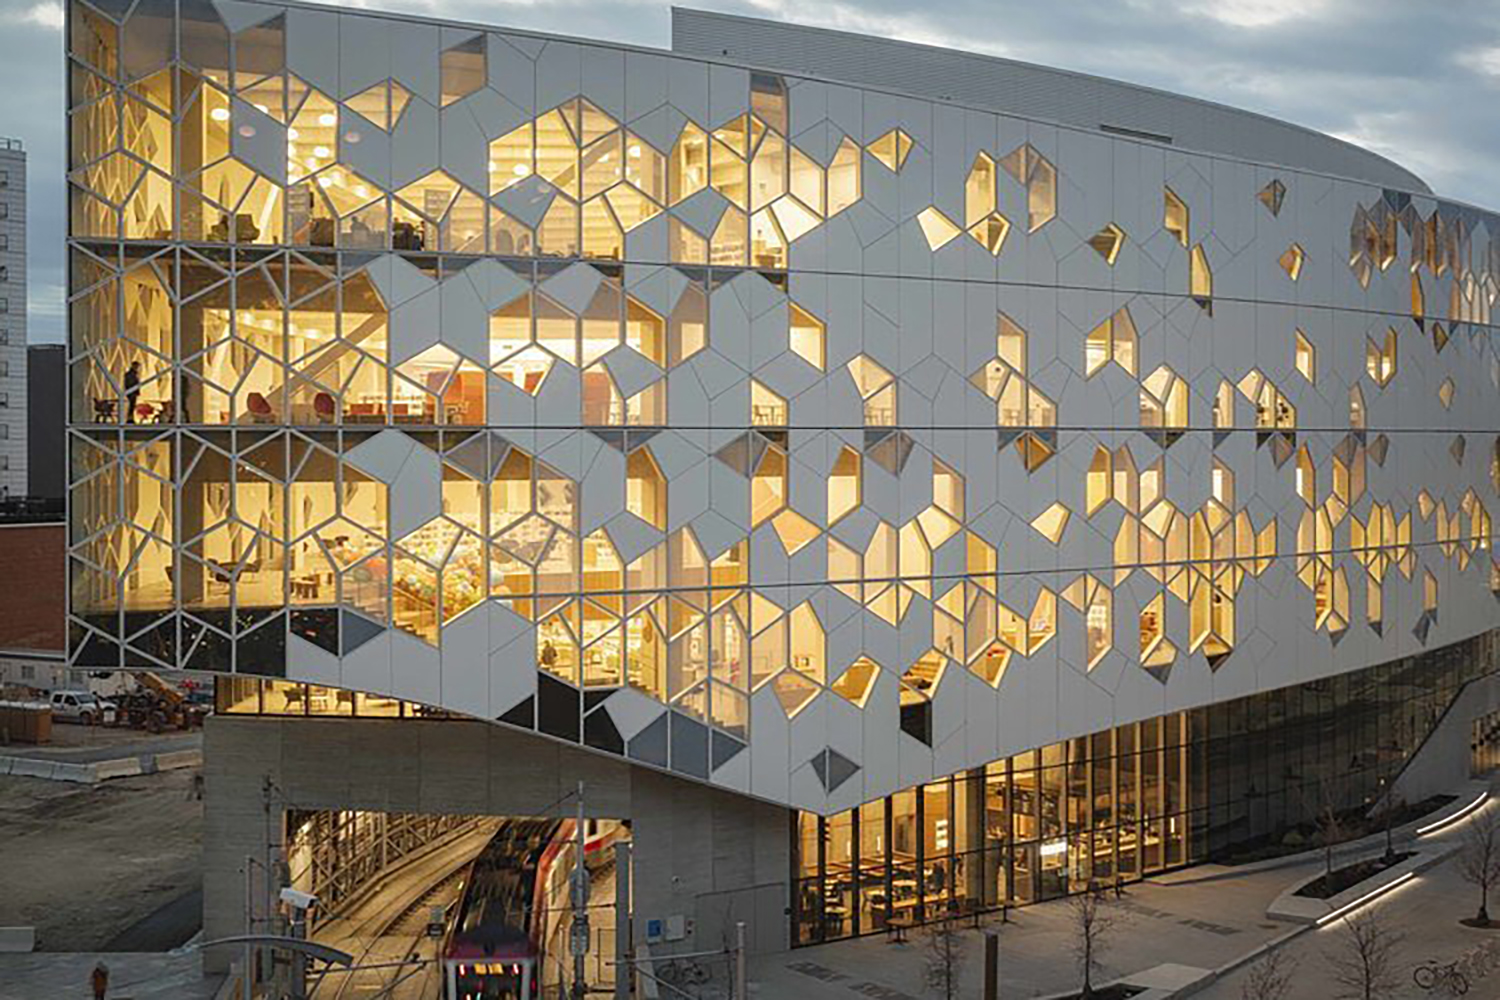 Calgary Central Library makes Architectural Digest list as one of the worlds most futuristic libraries